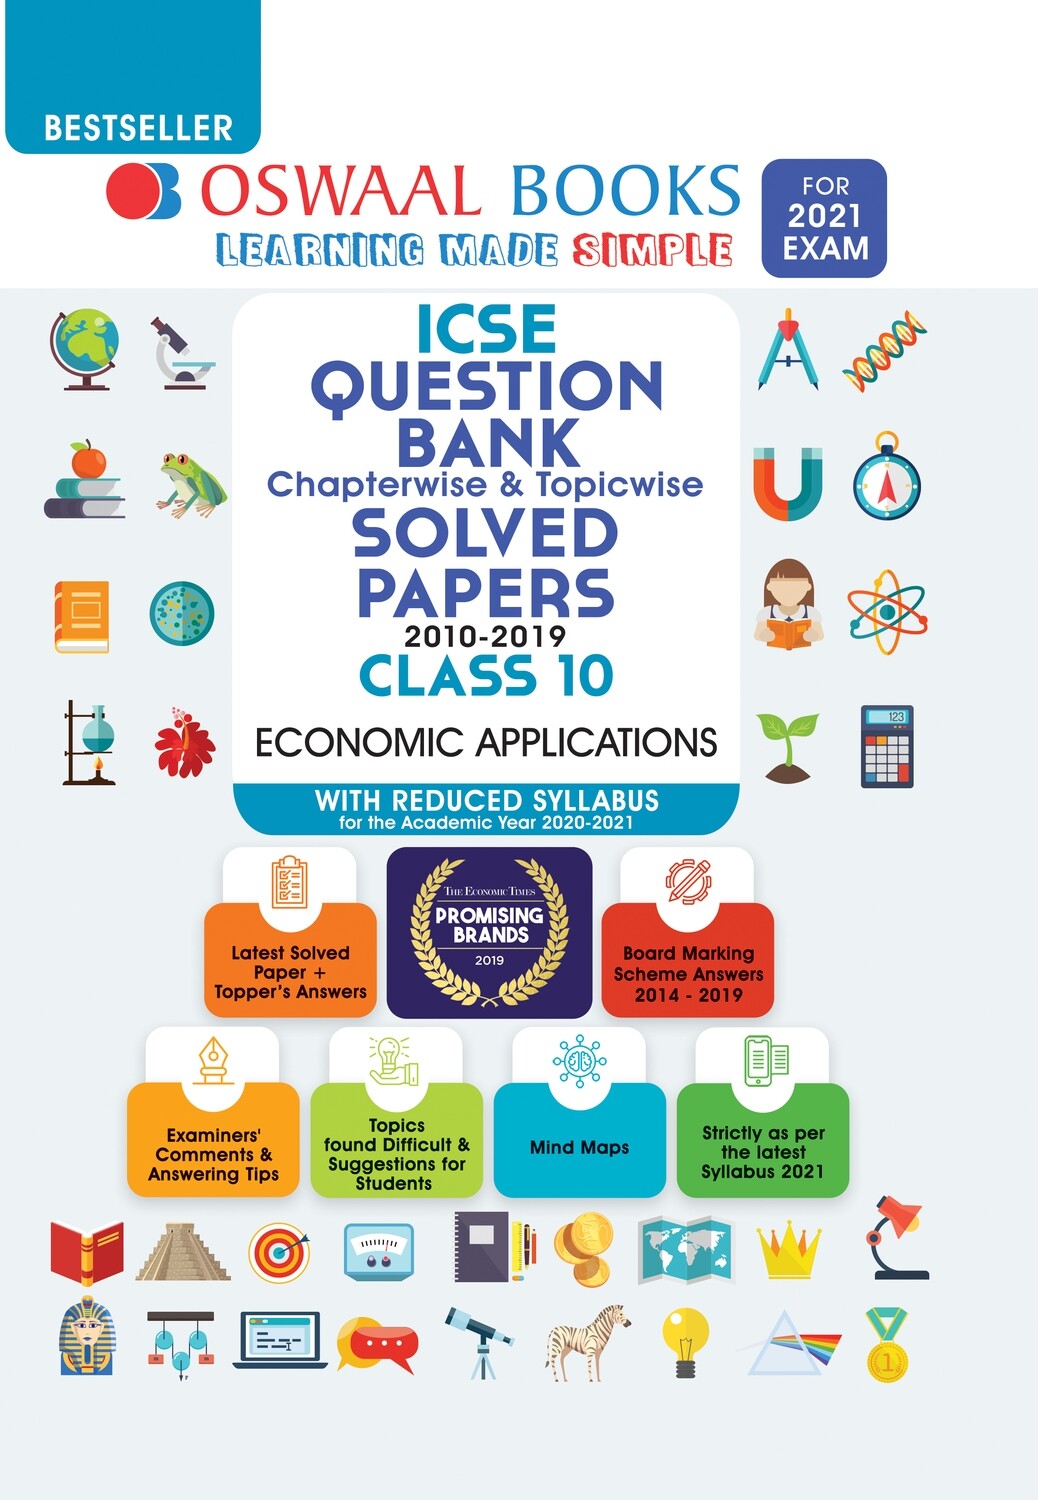 Buy e-book: Oswaal ICSE Question Bank Chapterwise & Topicwise Solved Papers, Economics Applications, Class 10 (R